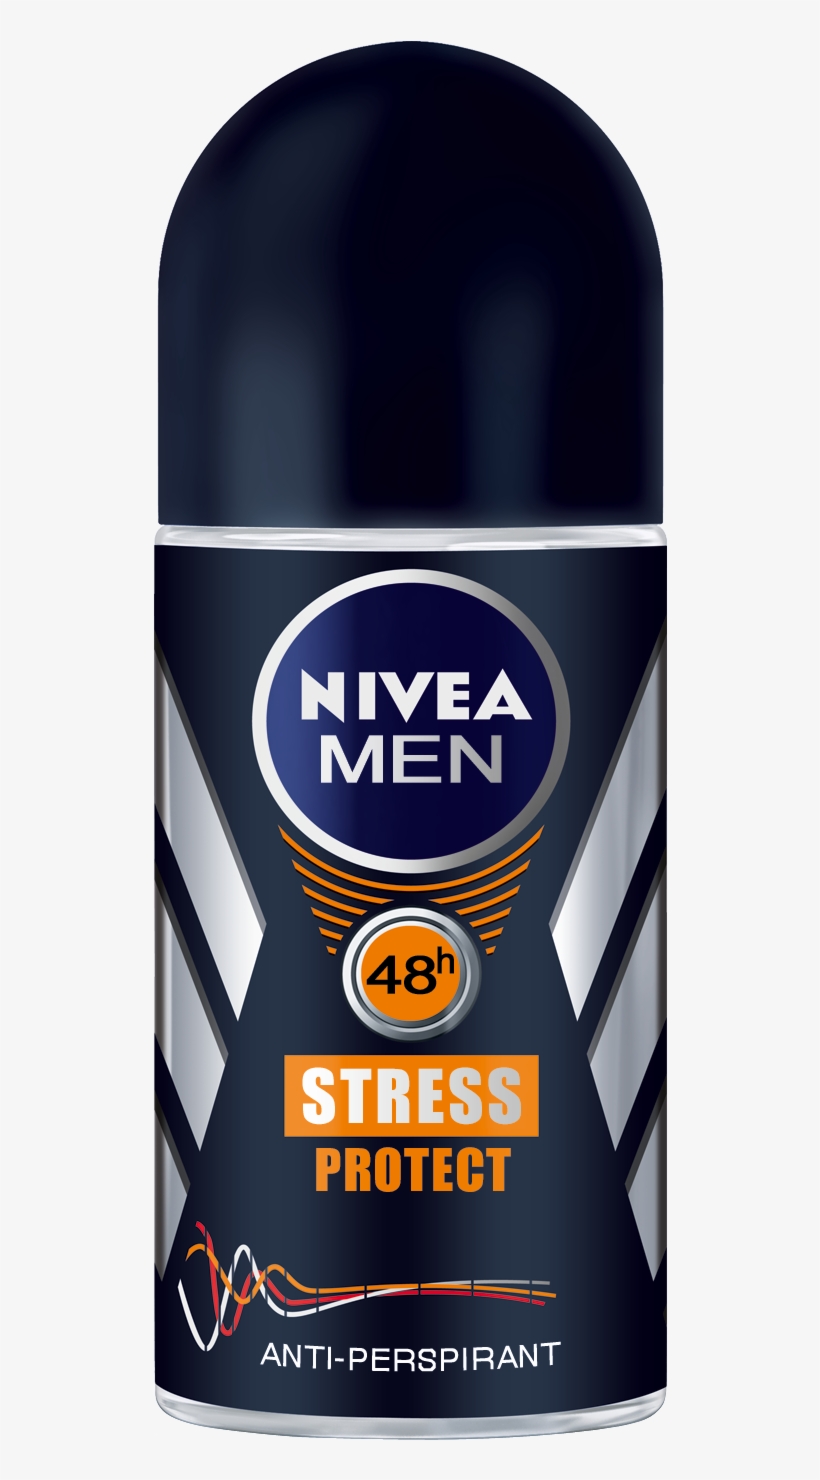 Intense Protection For Men That Keeps Away The Stress - Nivea, transparent png #8876258